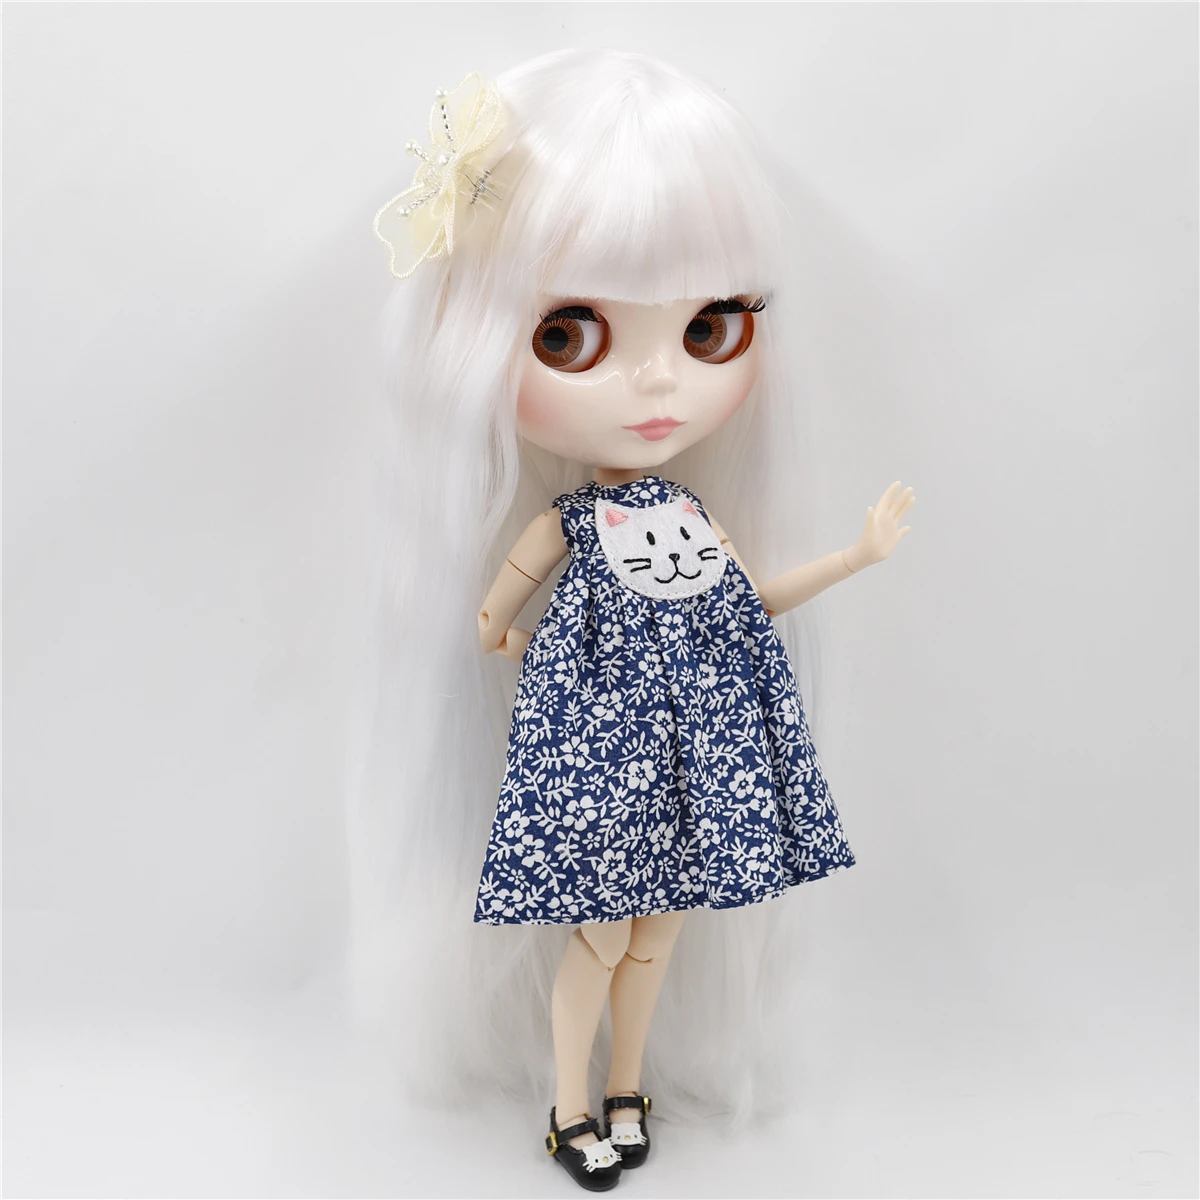 Neo Blythe Doll with White Hair, Tan Skin, Shiny Face & Jointed Body 2